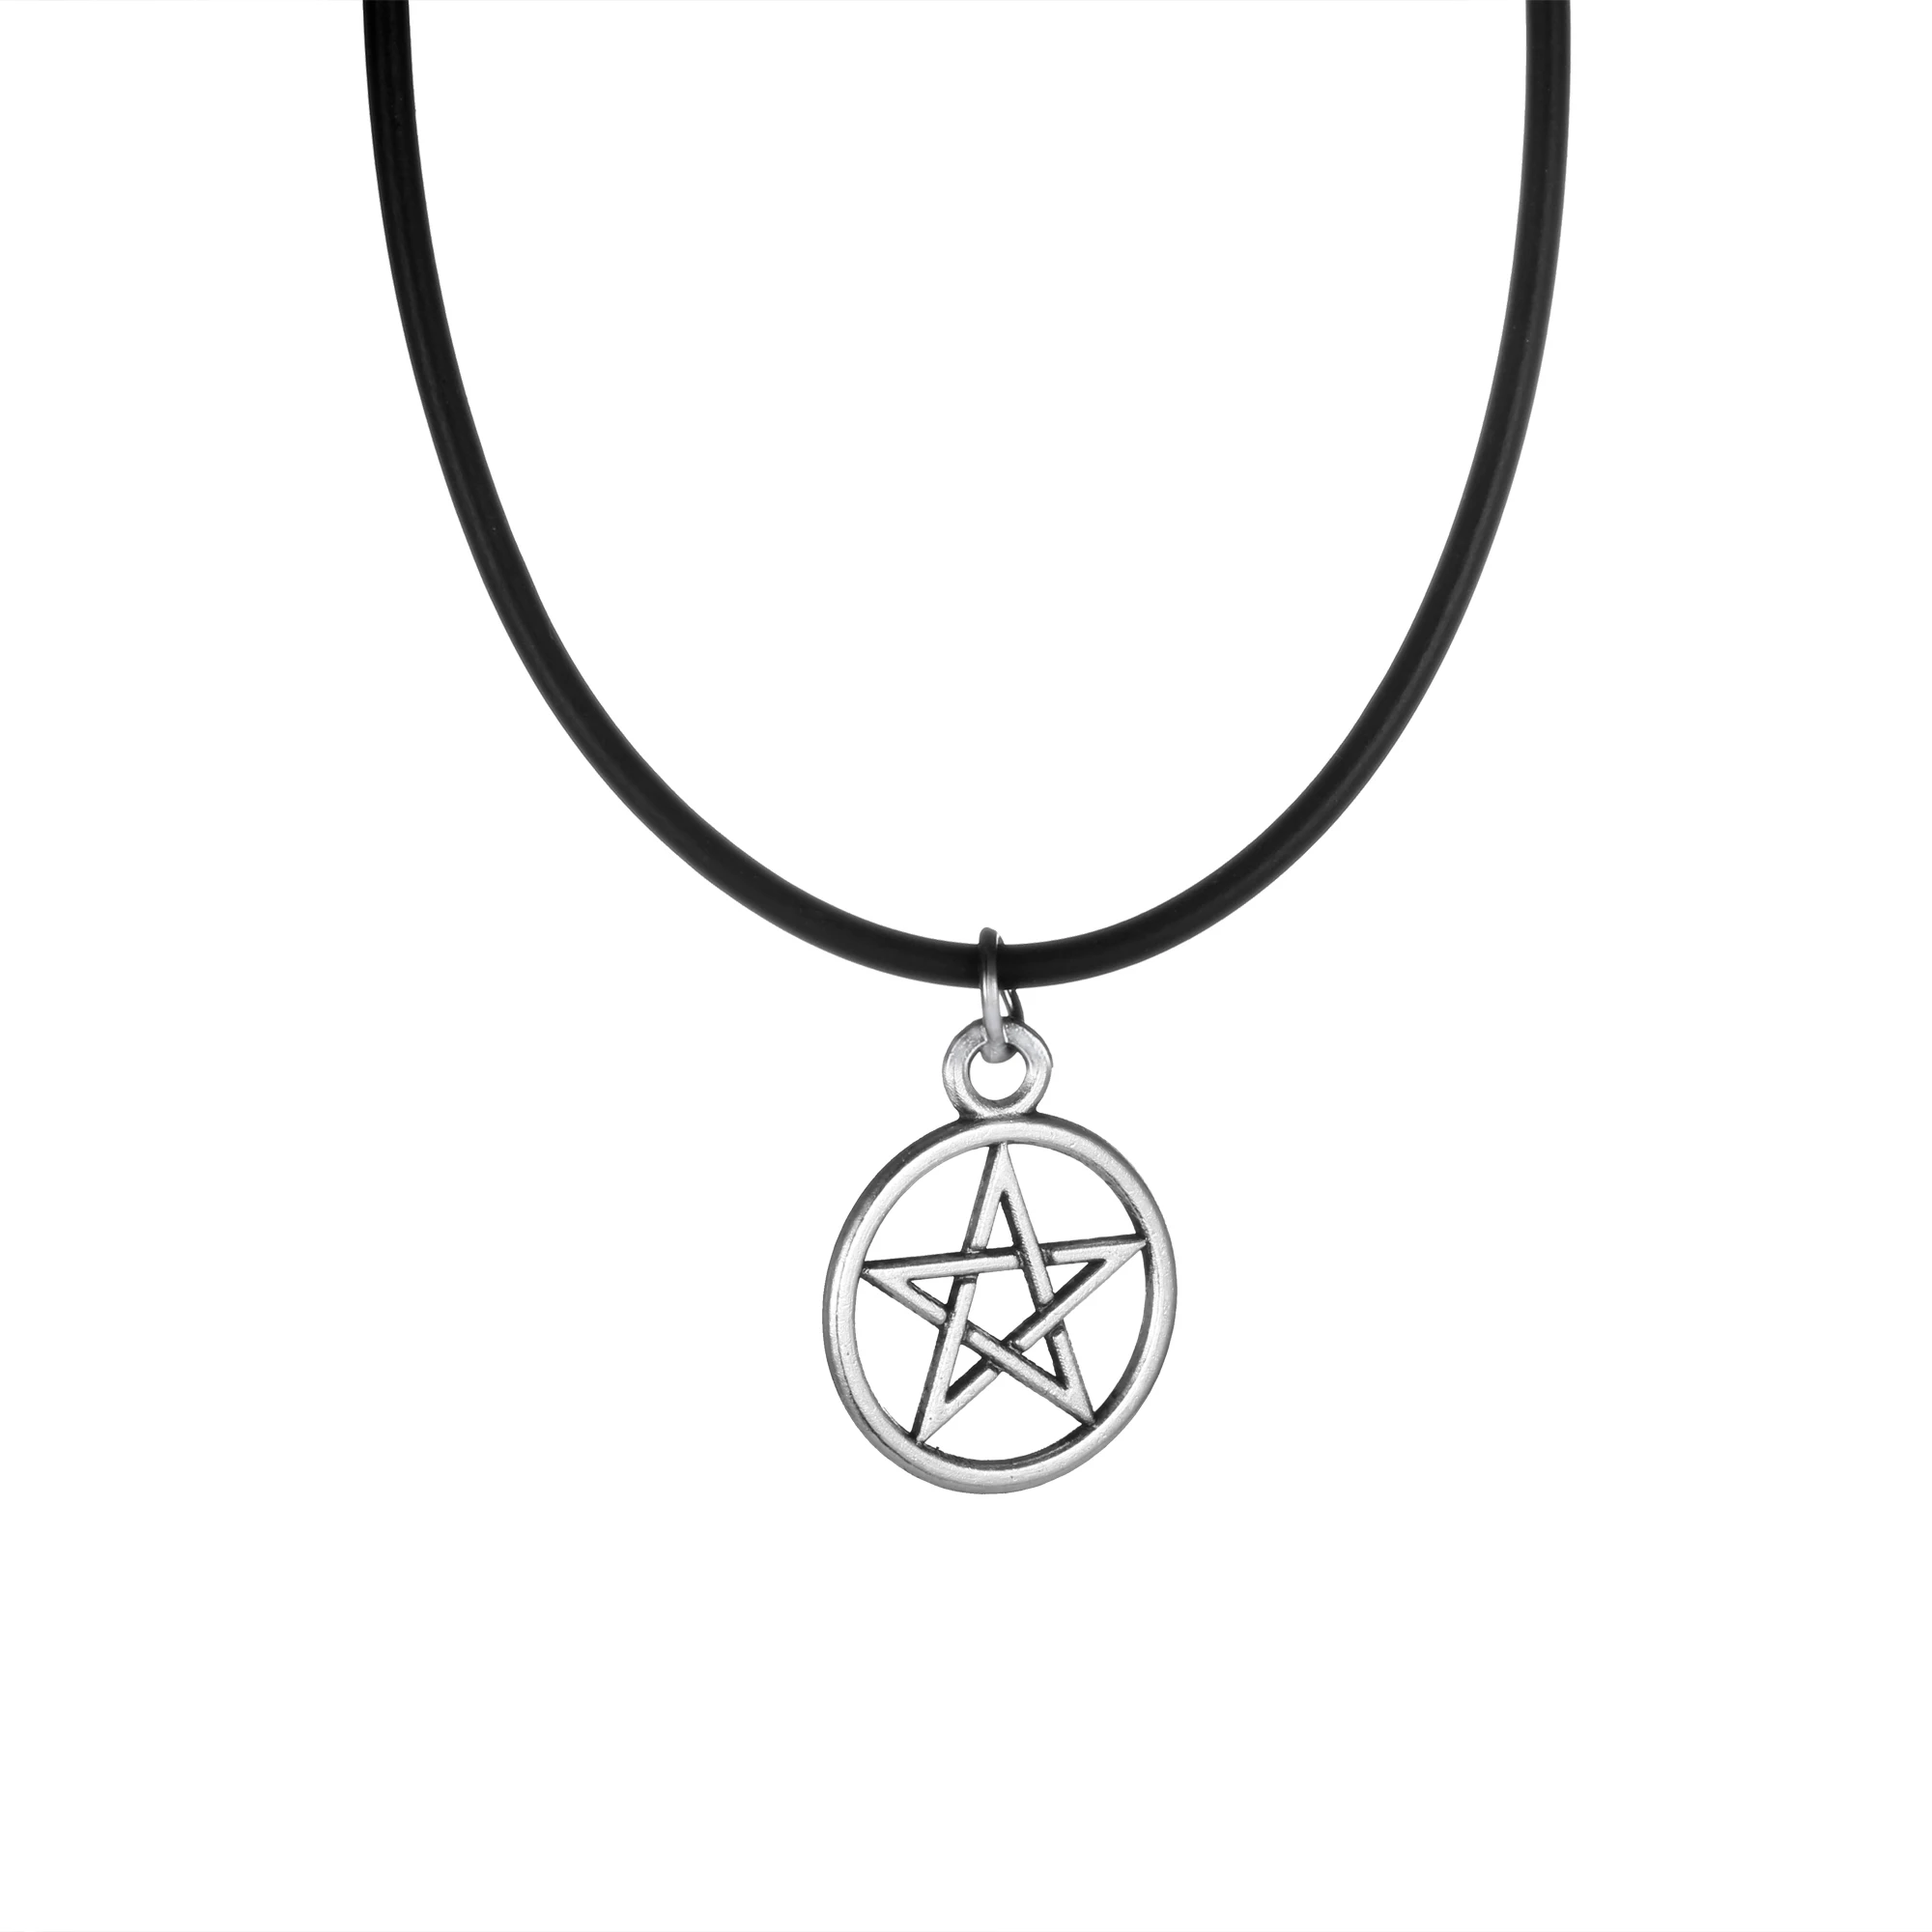 Fashion Vintage Round Star Pentagram Pendant Clavicle Chain Choker Necklace for Men Women Punk Leather Chain Collar Jewelry Gift